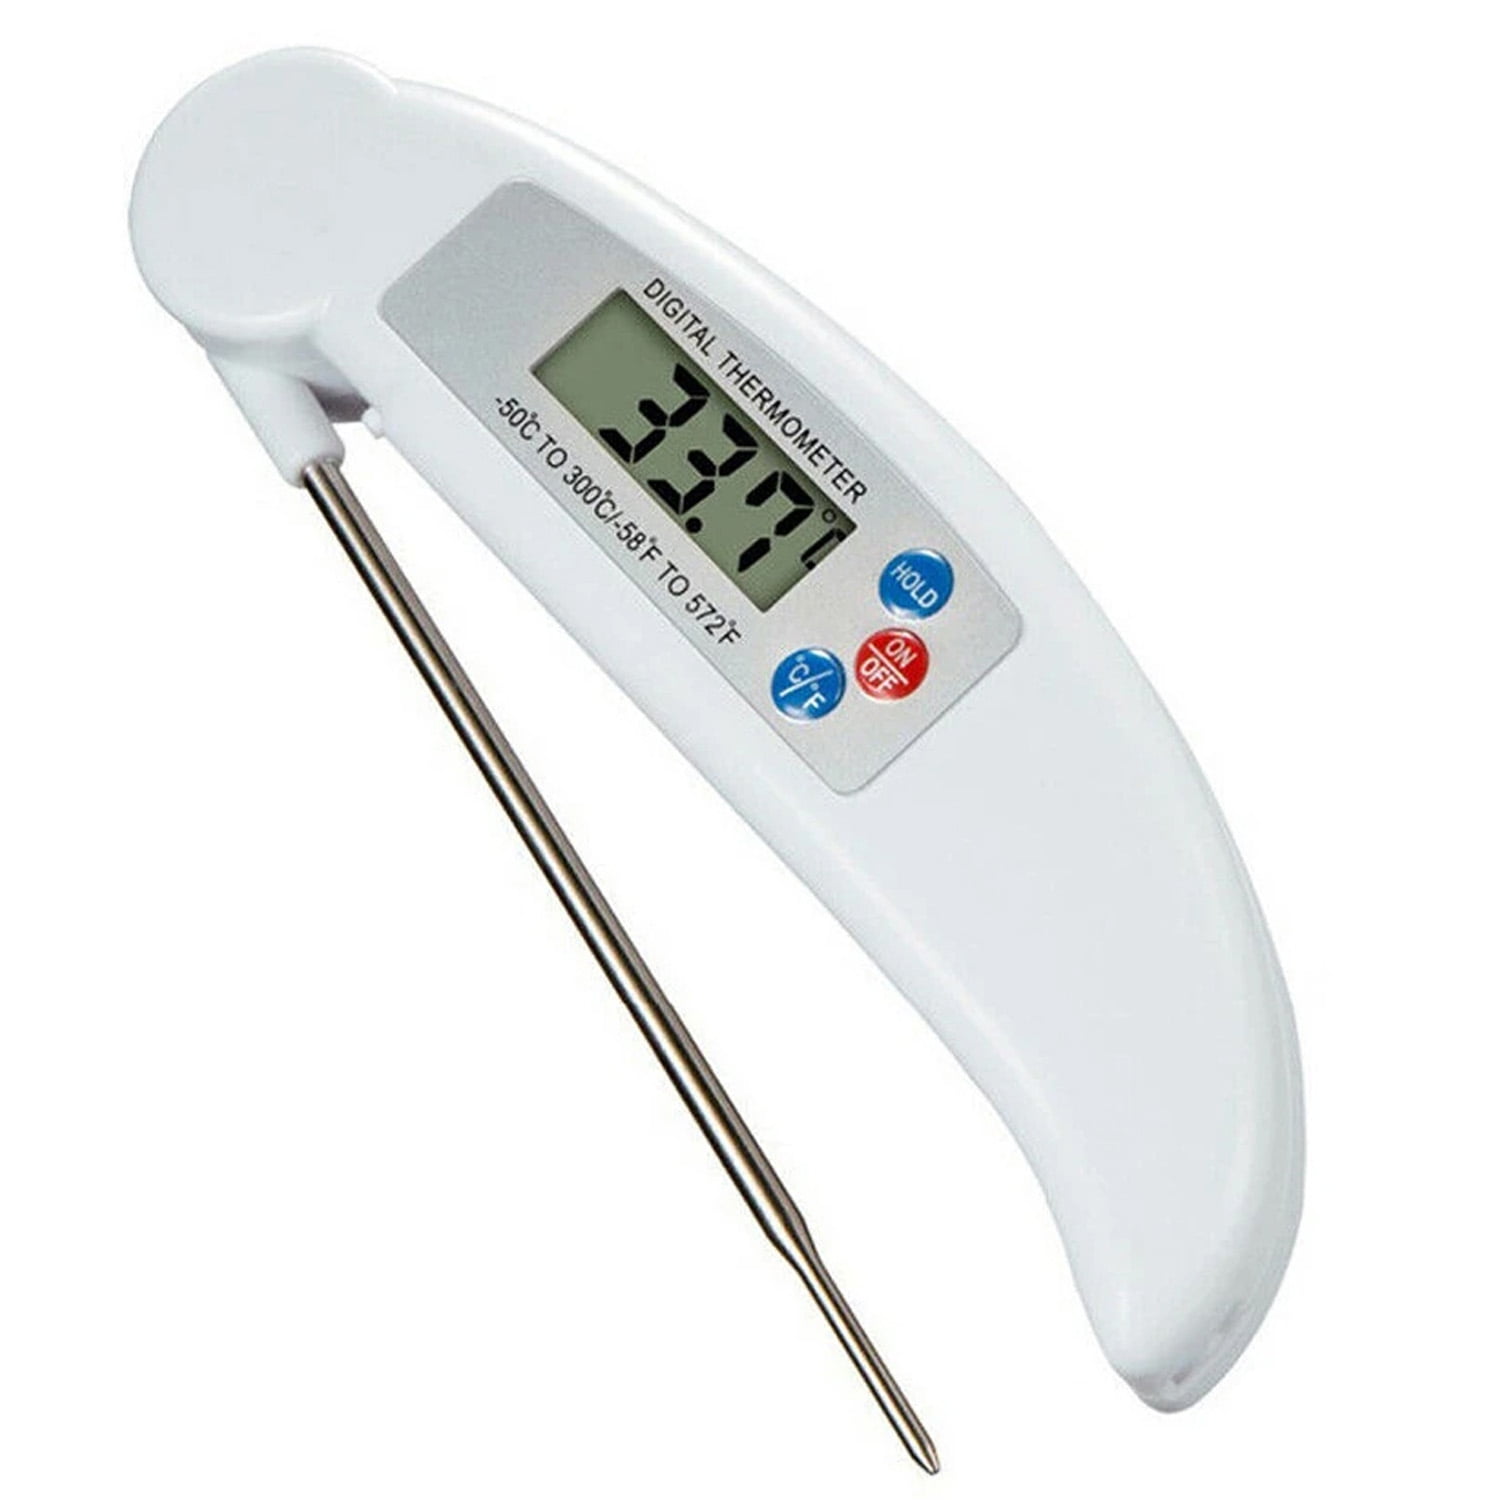 Metris Instruments Food Thermometer, Digital Meat Thermometer Model TCT703,  EA - Fry's Food Stores